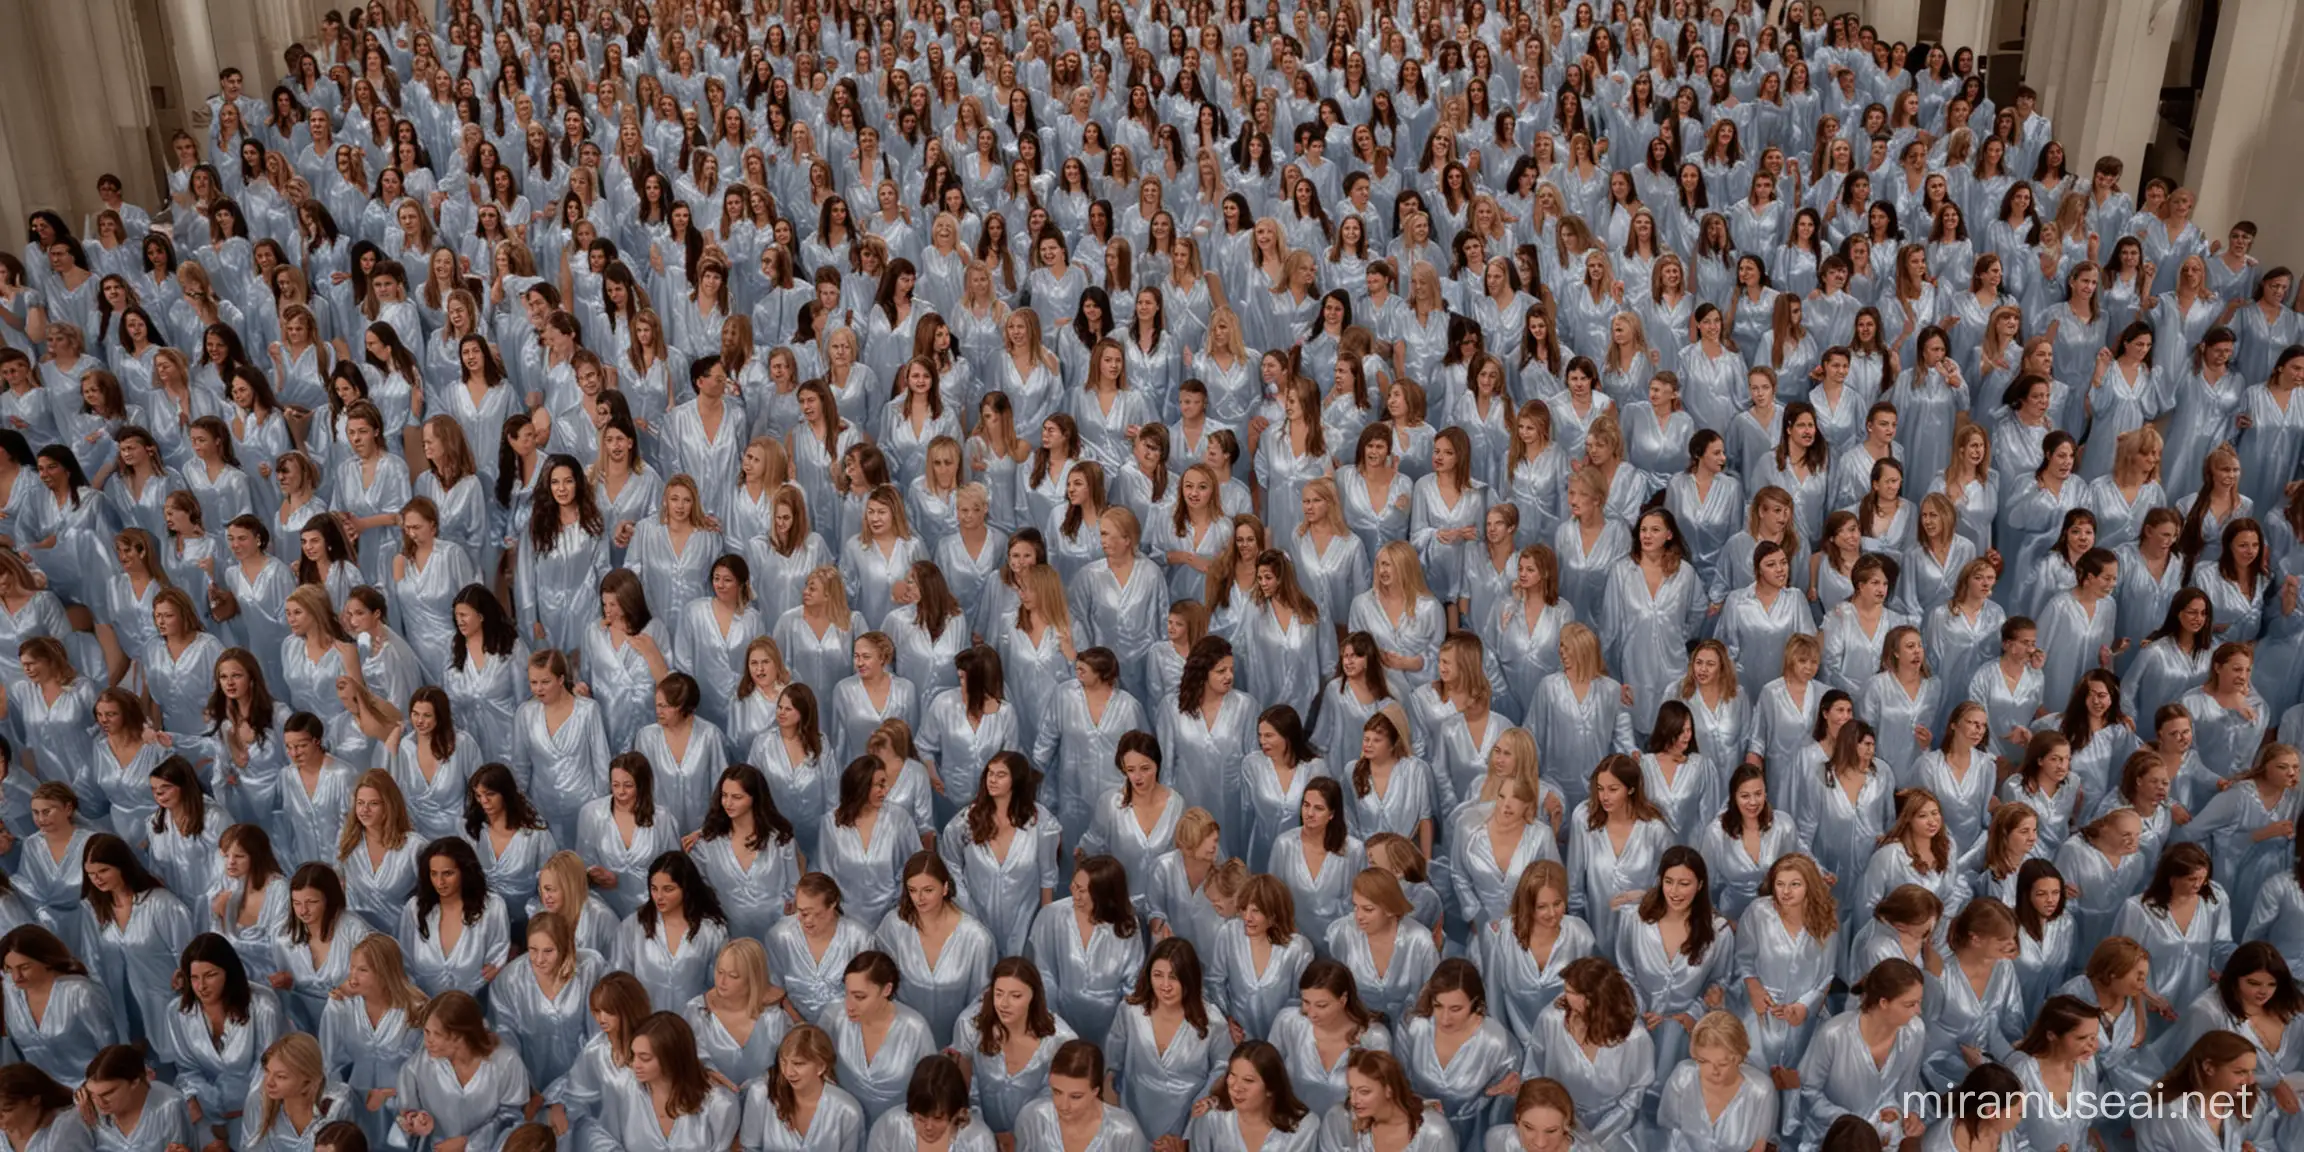 Hundreds of women in satin nightgowns watch you from below in a huge room